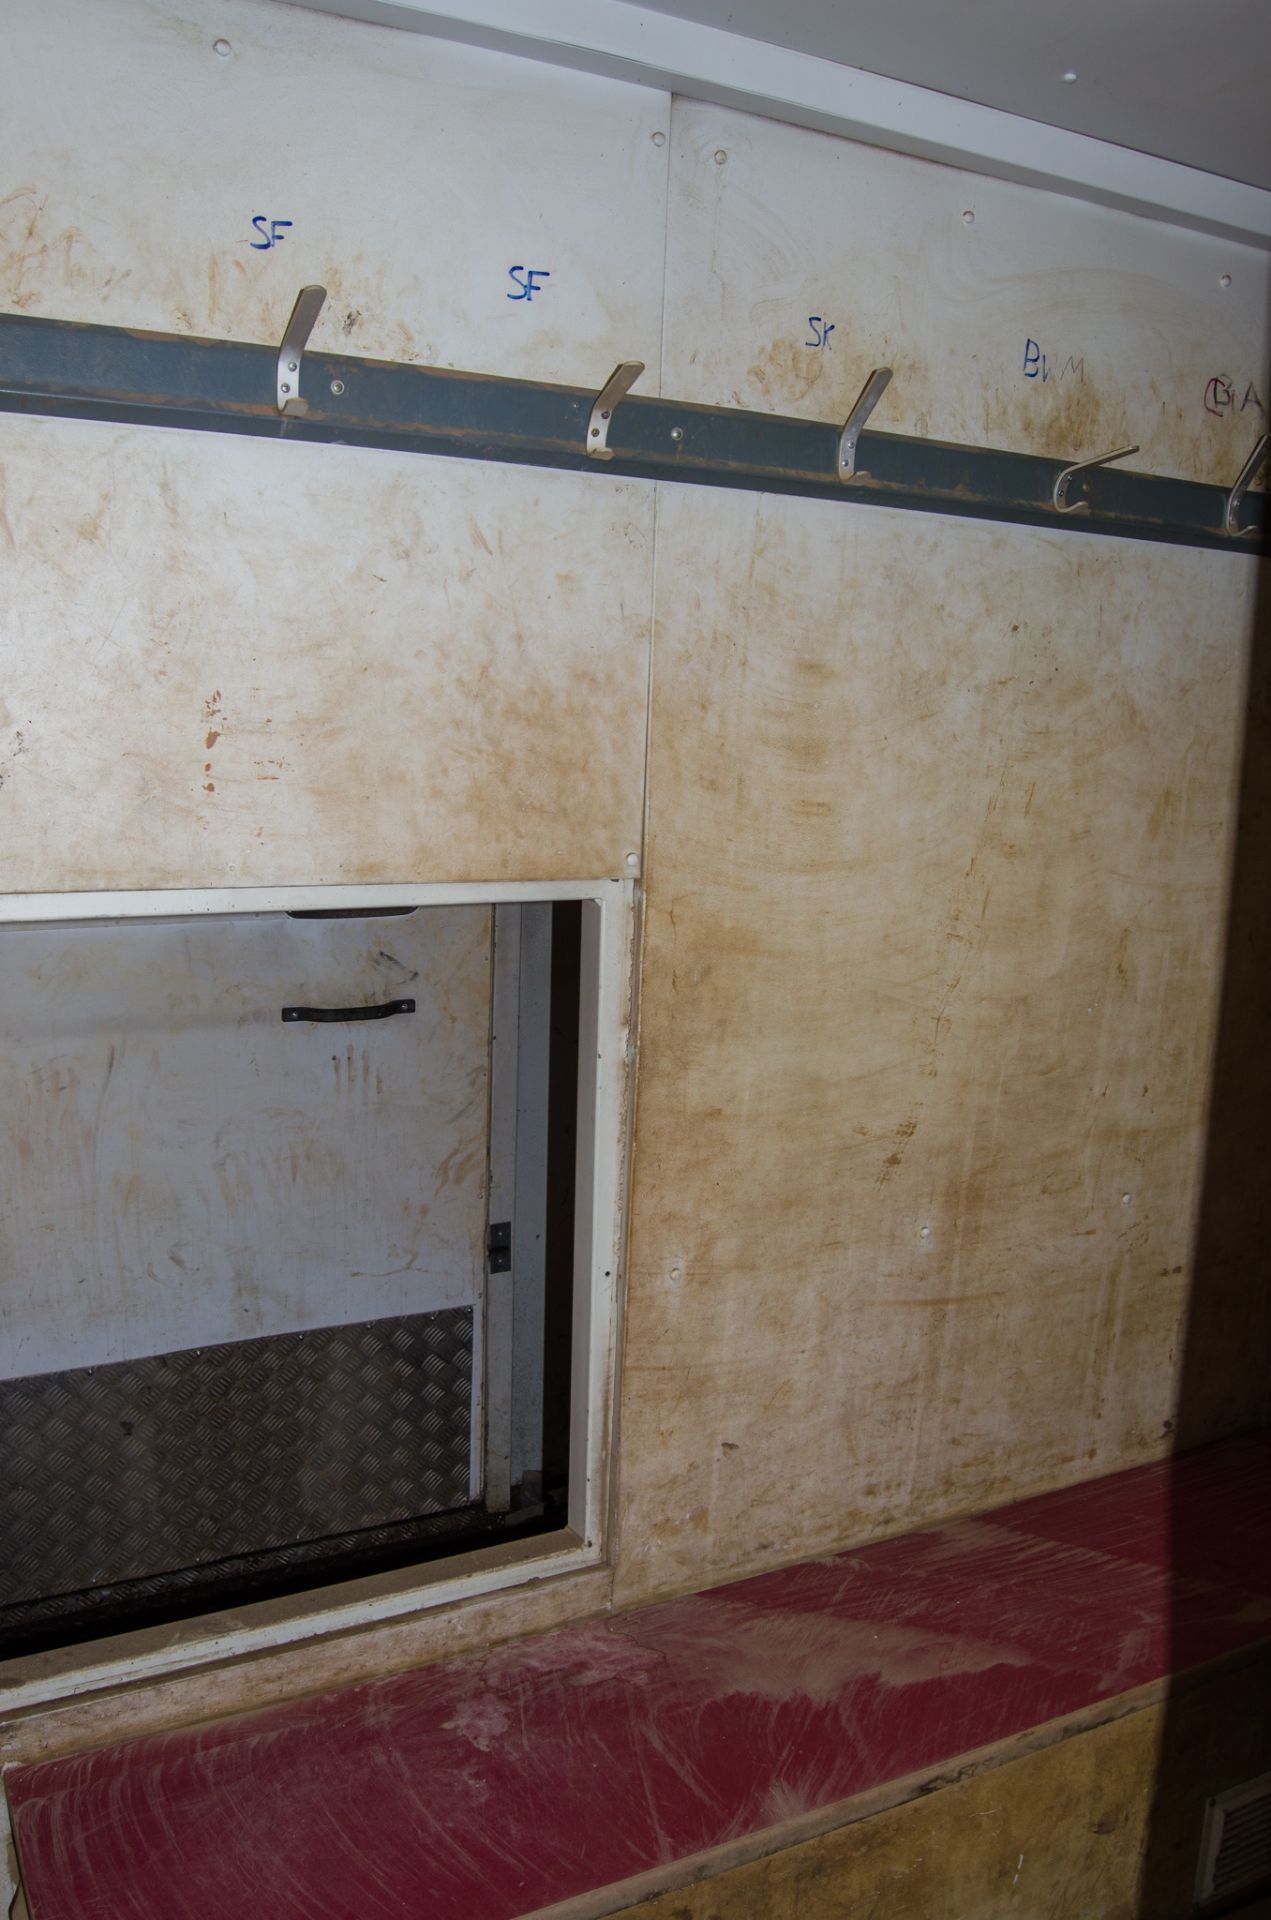 18 ft x 9 ft steel anti vandal welfare site unit Comprising of: canteen area, drying room, - Image 6 of 10